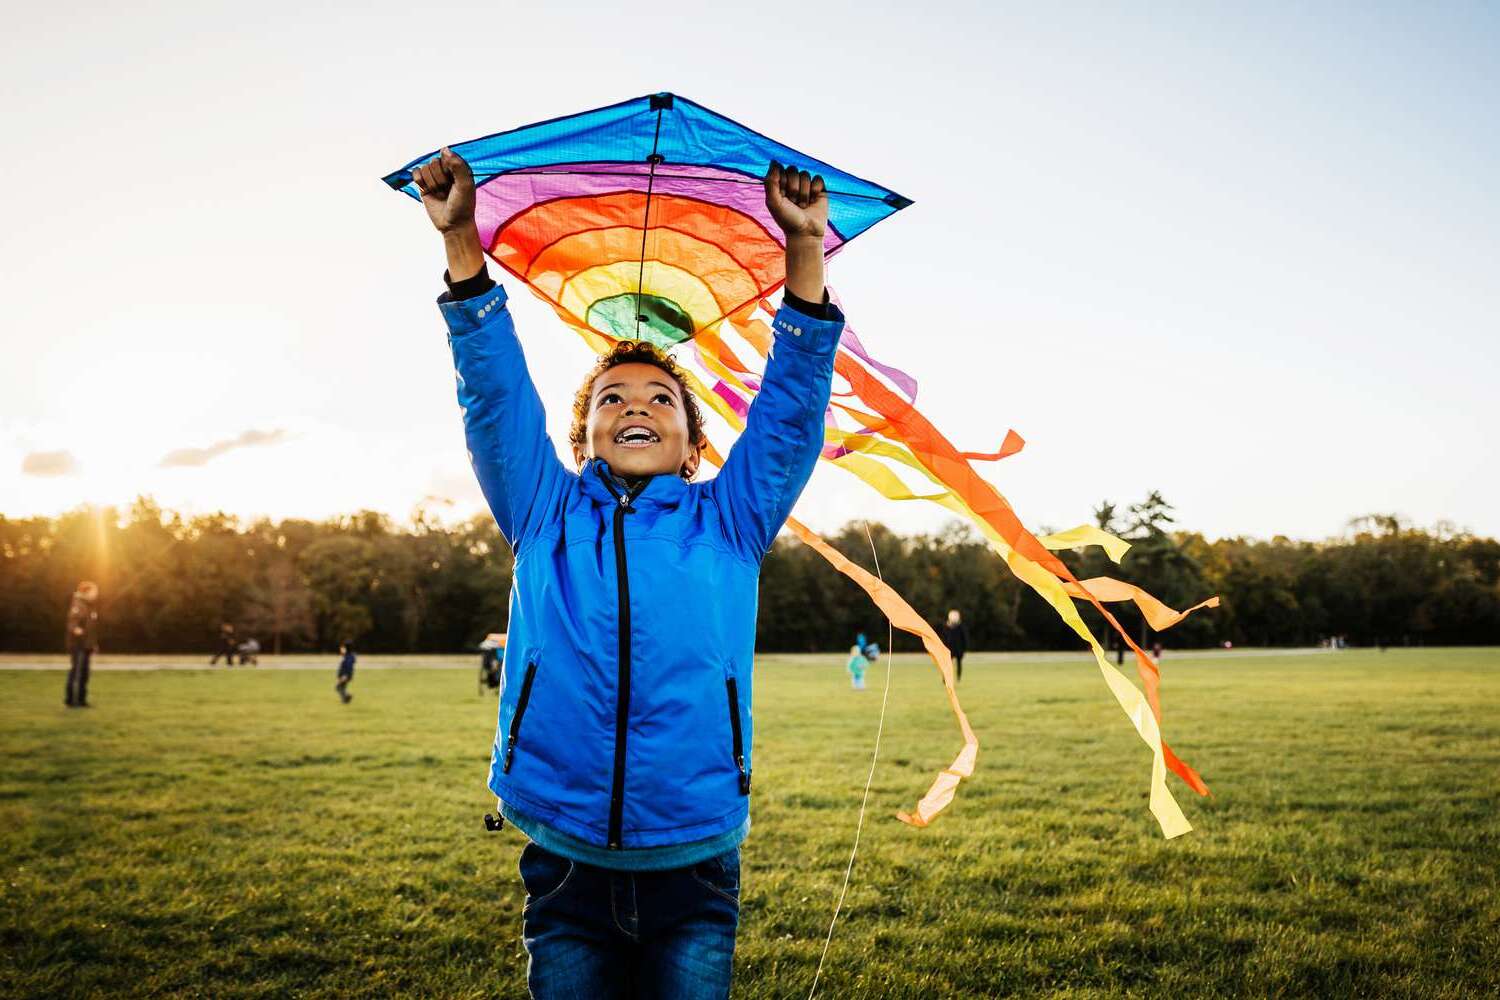 How To Build A Kite